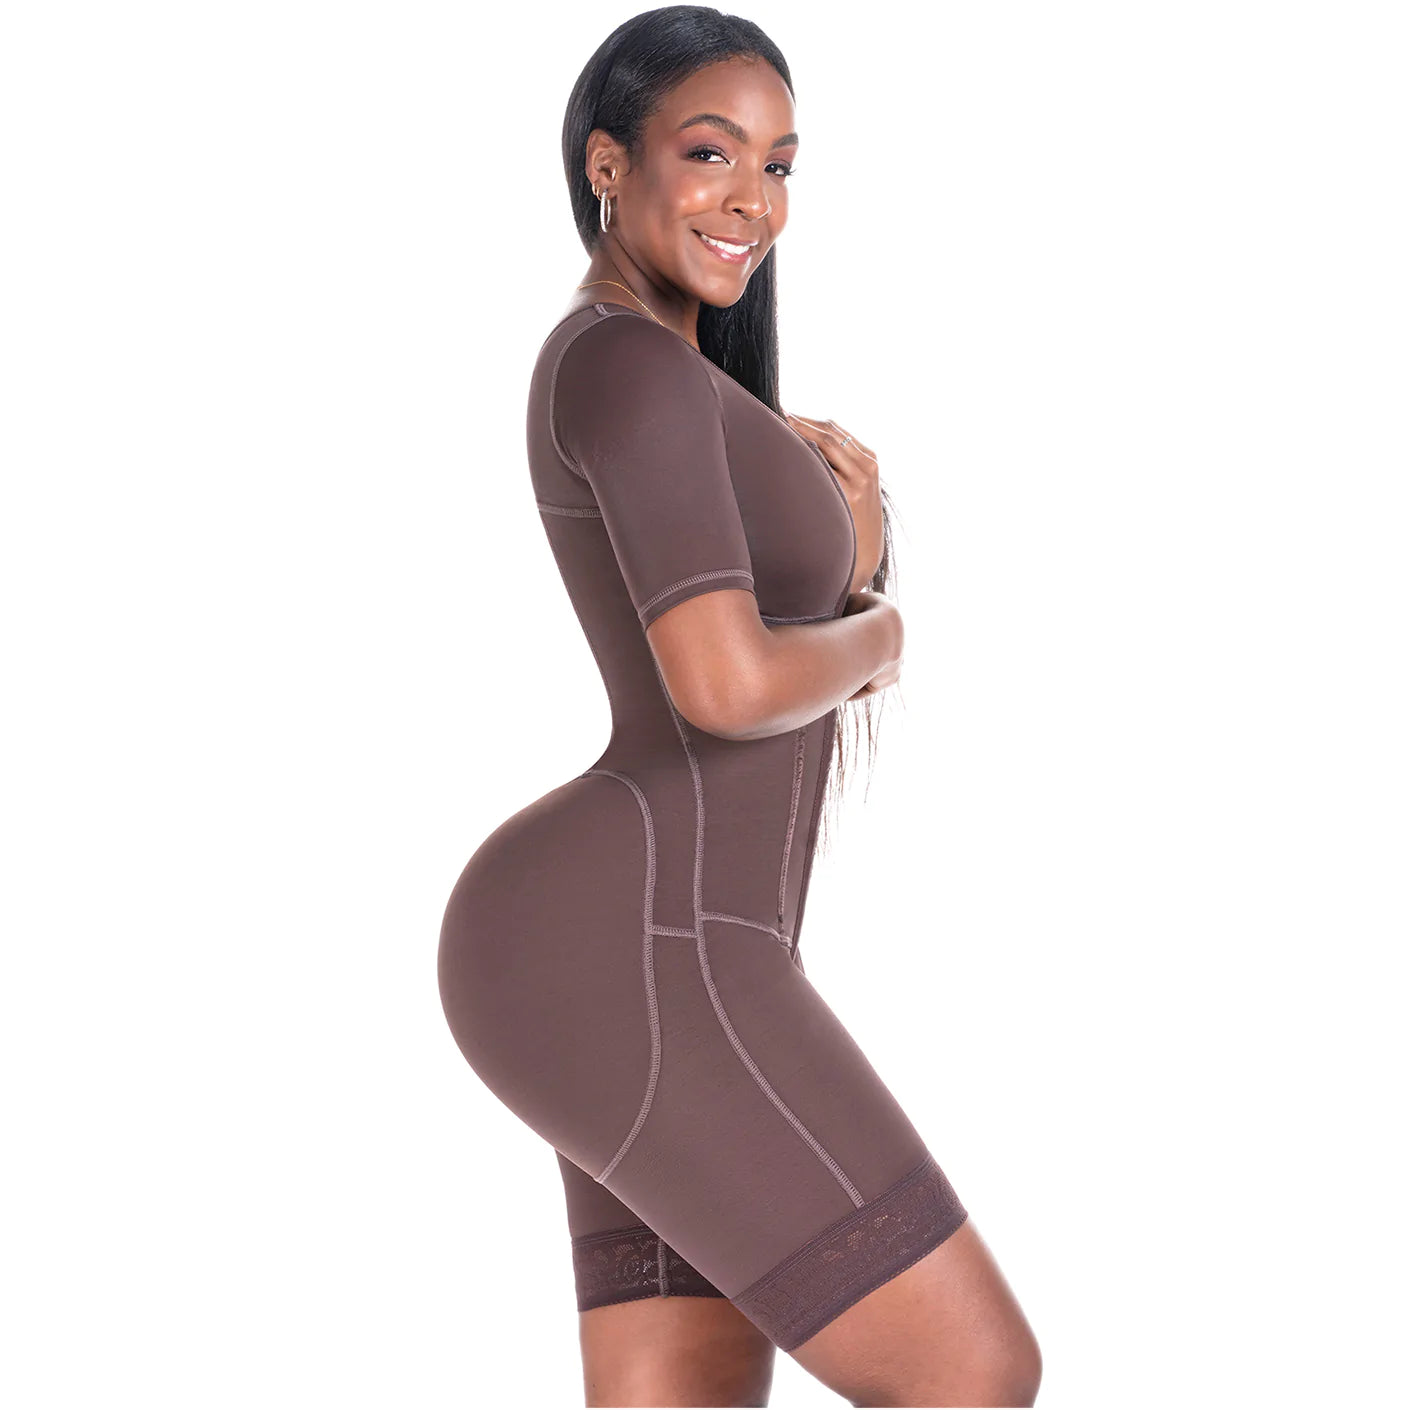 Diva's Curves Post Surgical Compression Garments